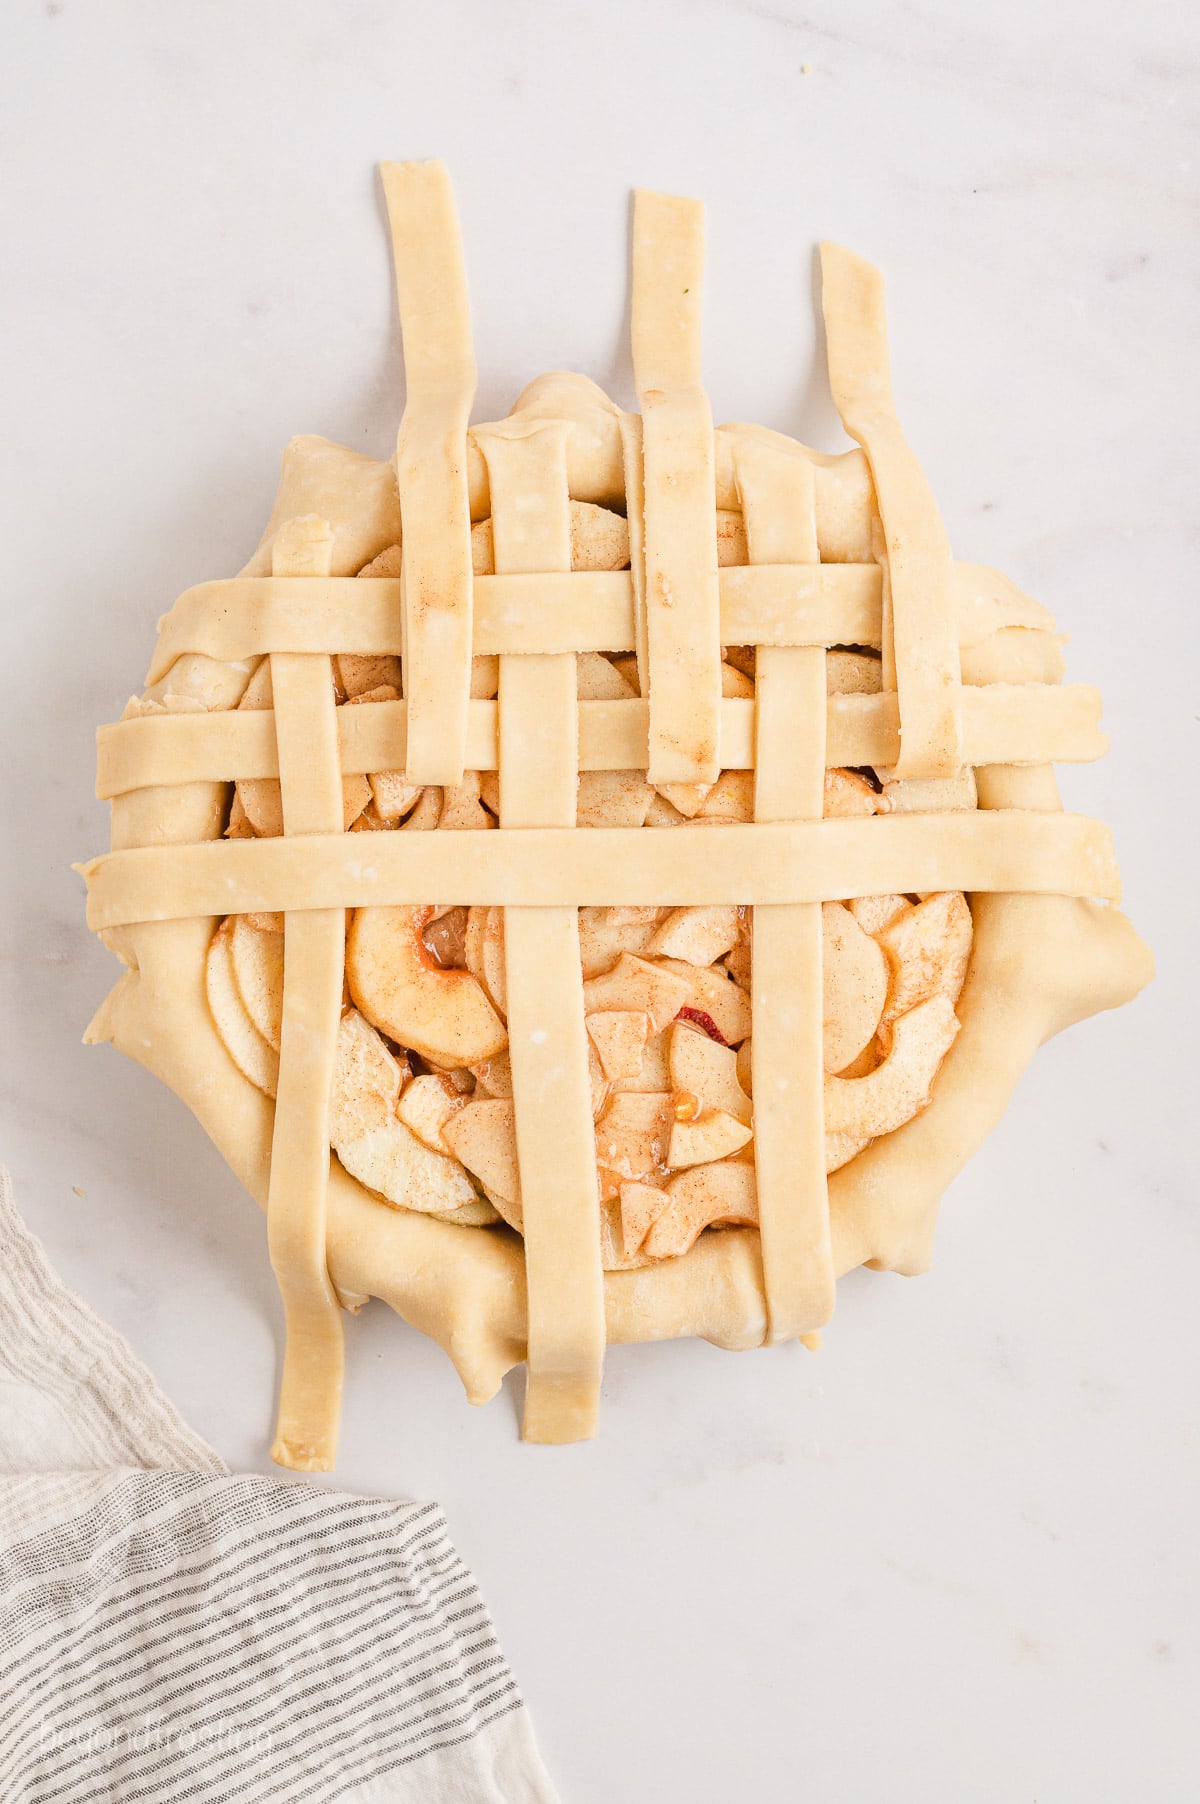 Partially woven lattice crust over a pie shell filled with pie filling.